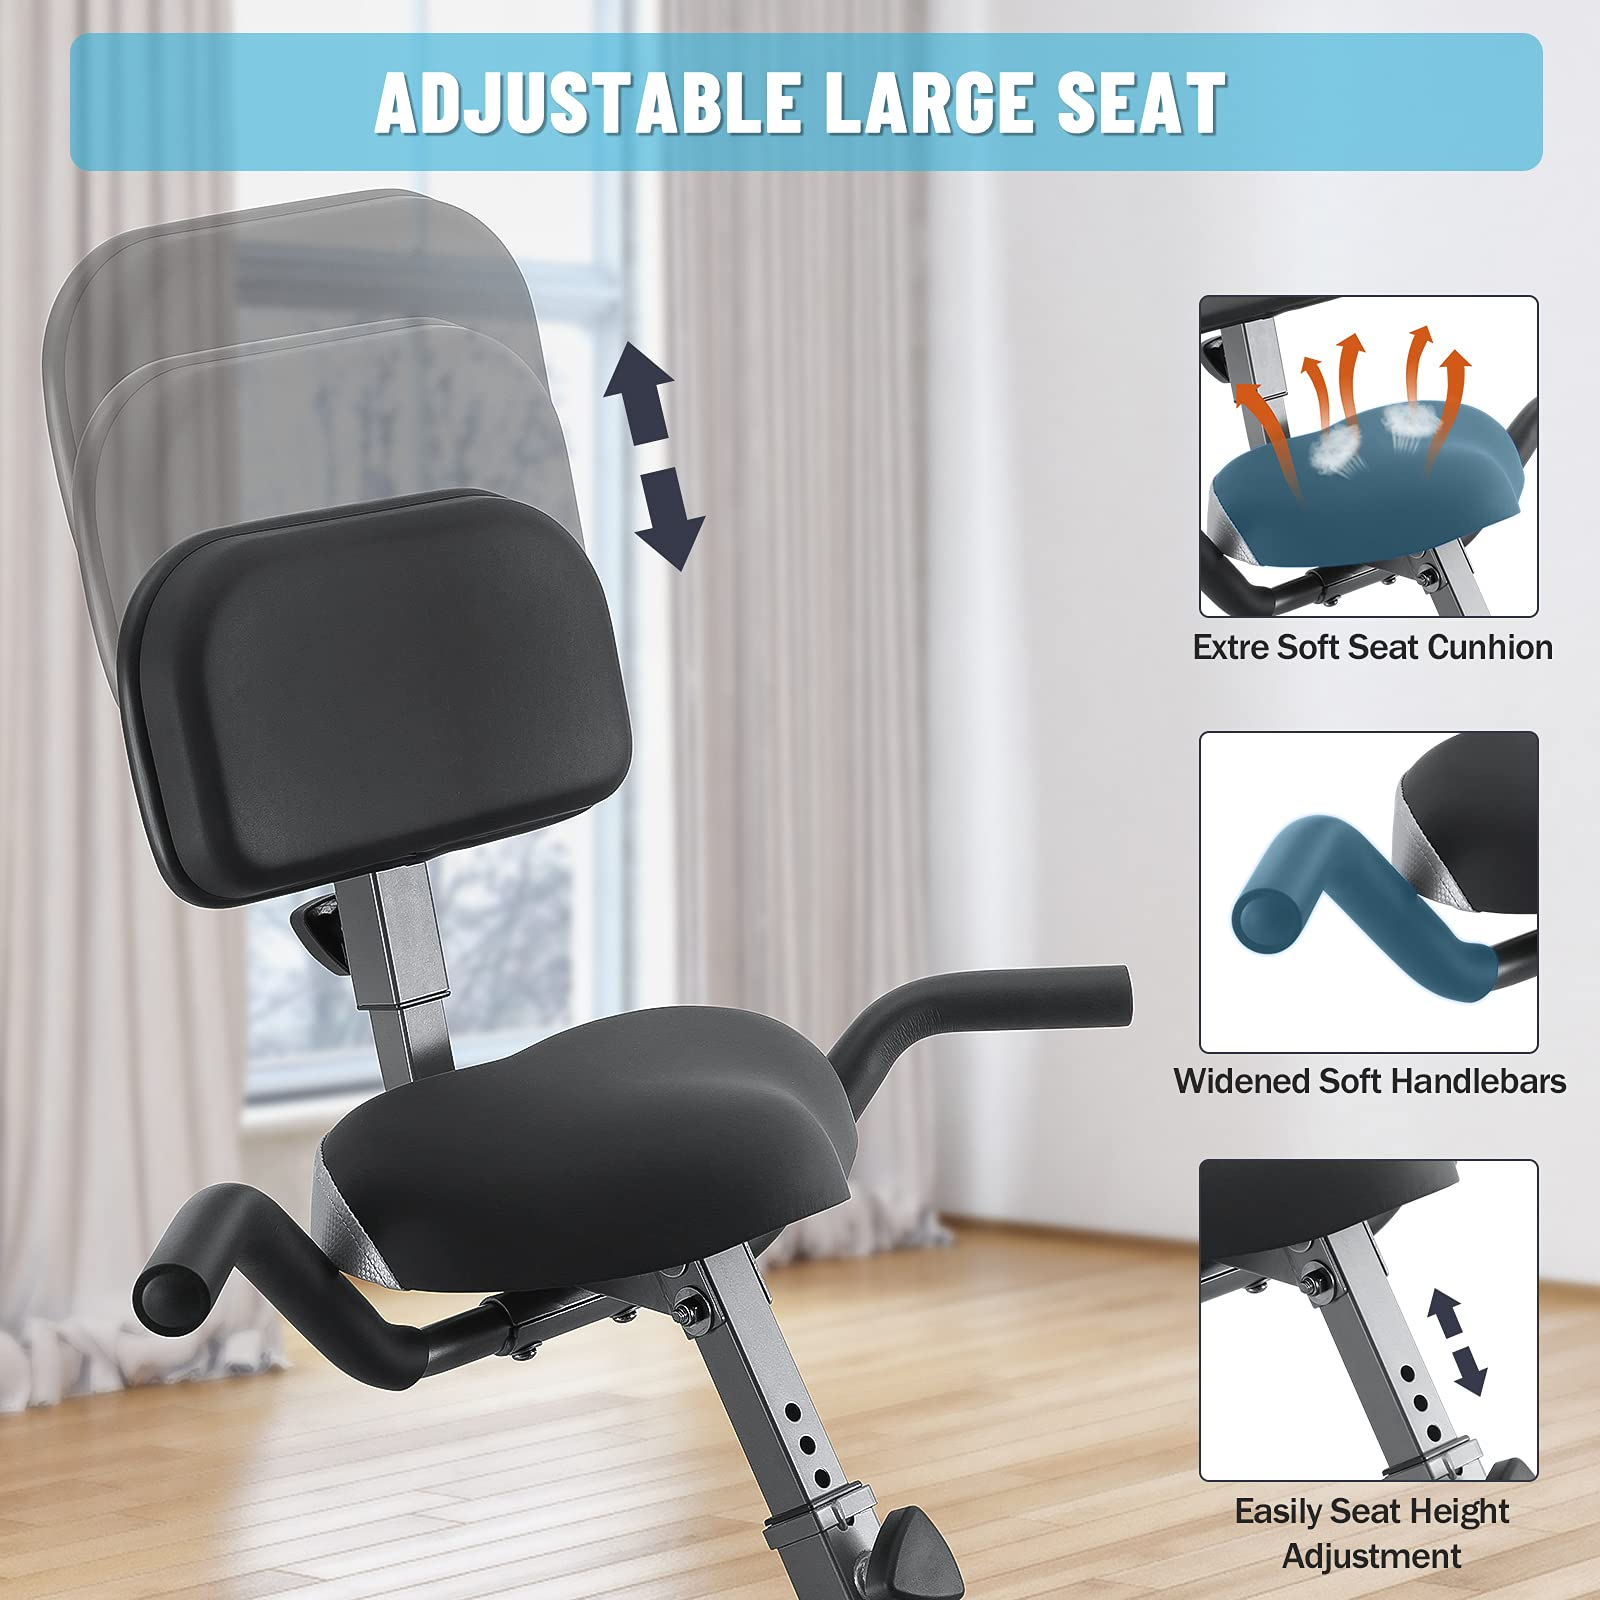 Load image into Gallery viewer, Exercise Bike Foldable Stationary Bike High configuration Magnetic Upright Recumbent Portable Fitness Cycle with Arm Resistance Bands/Extra Large Adjustable Backrest Seat/LCD Display/Pulse Sensor/for Home Indoor (3-IN-1 2021 upgraded)
